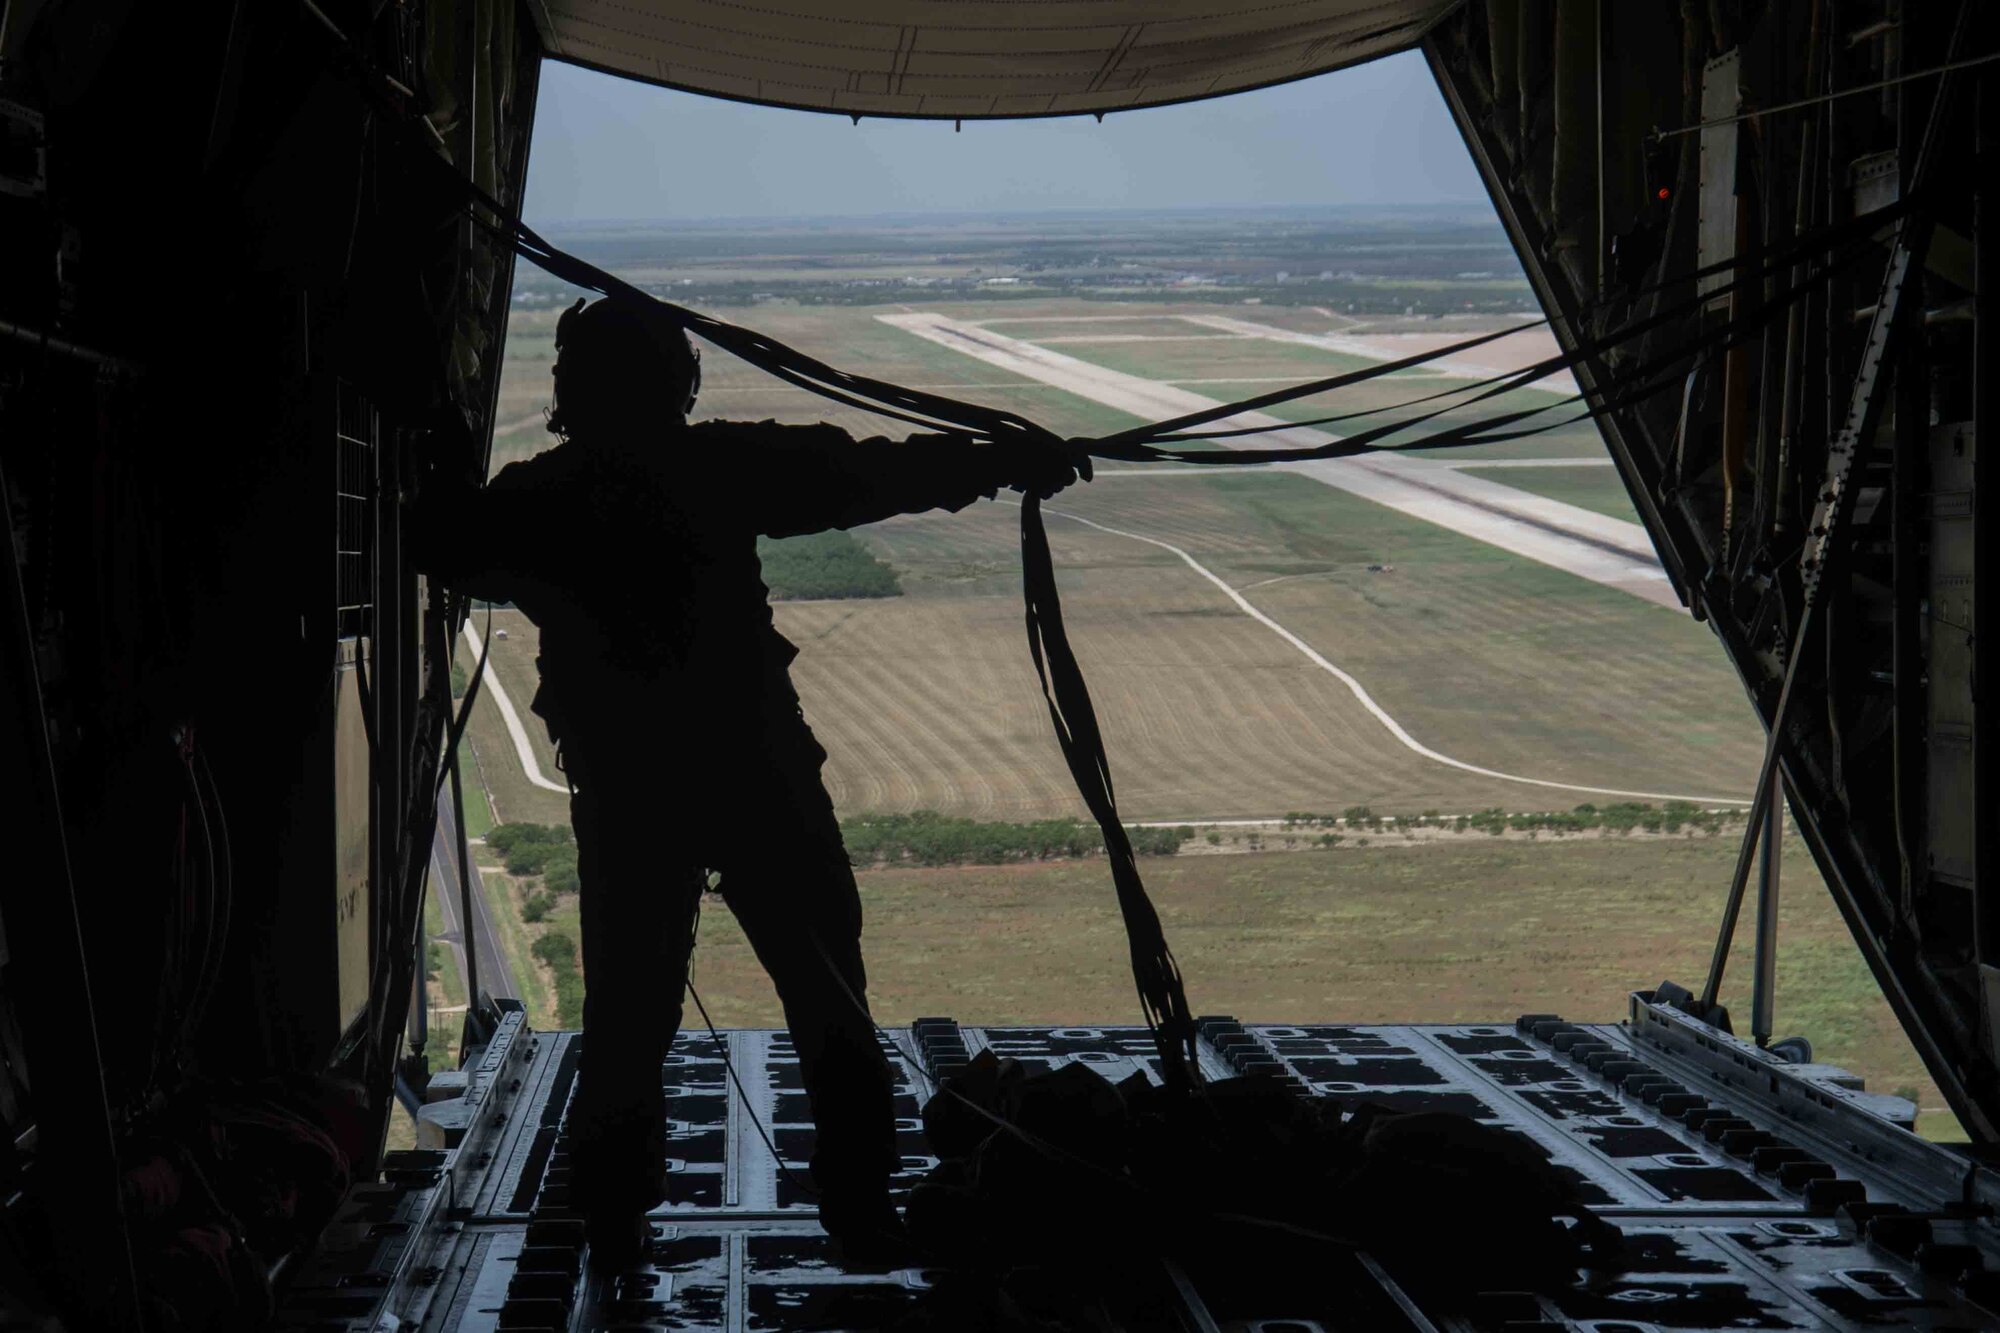 Master Sgt. Lynzey Thornton, 39th Airlift Squadron loadmaster, gathers cords after a simulated cargo drop during a Joint Forcible Entry exercise July 14, 2020, in Dyess AFB, Texas.